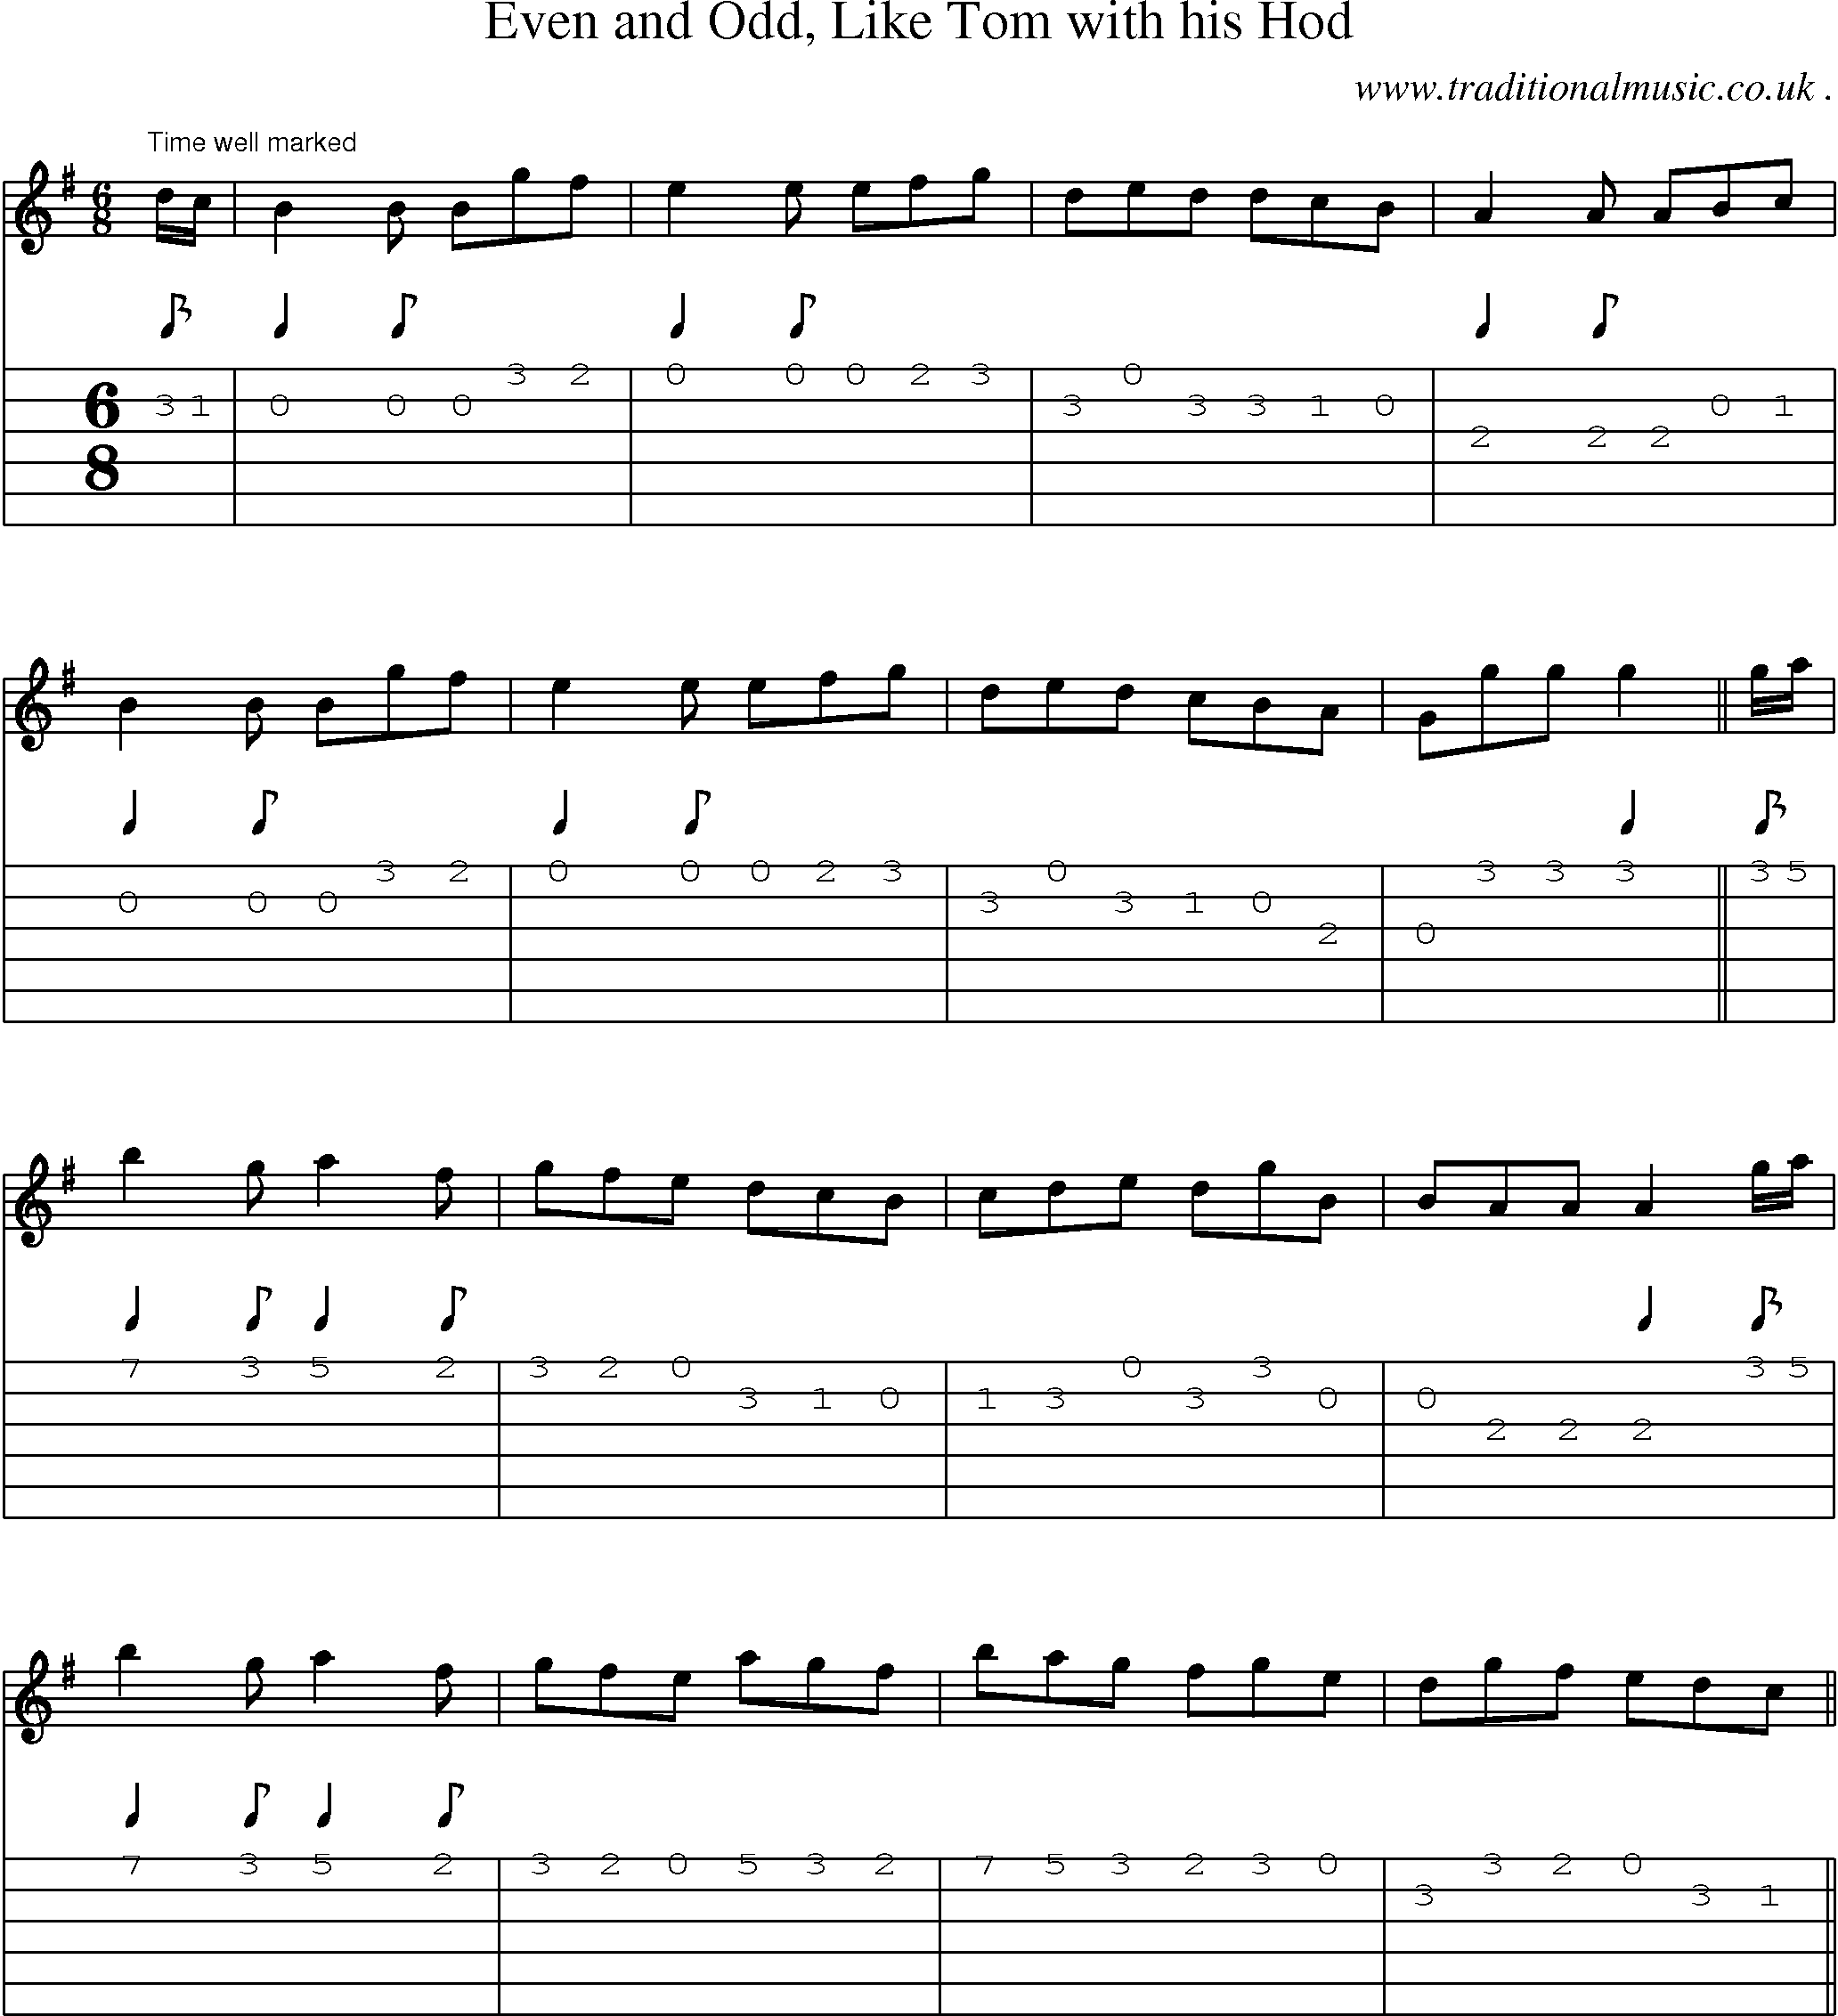 Sheet-Music and Guitar Tabs for Even And Odd Like Tom With His Hod